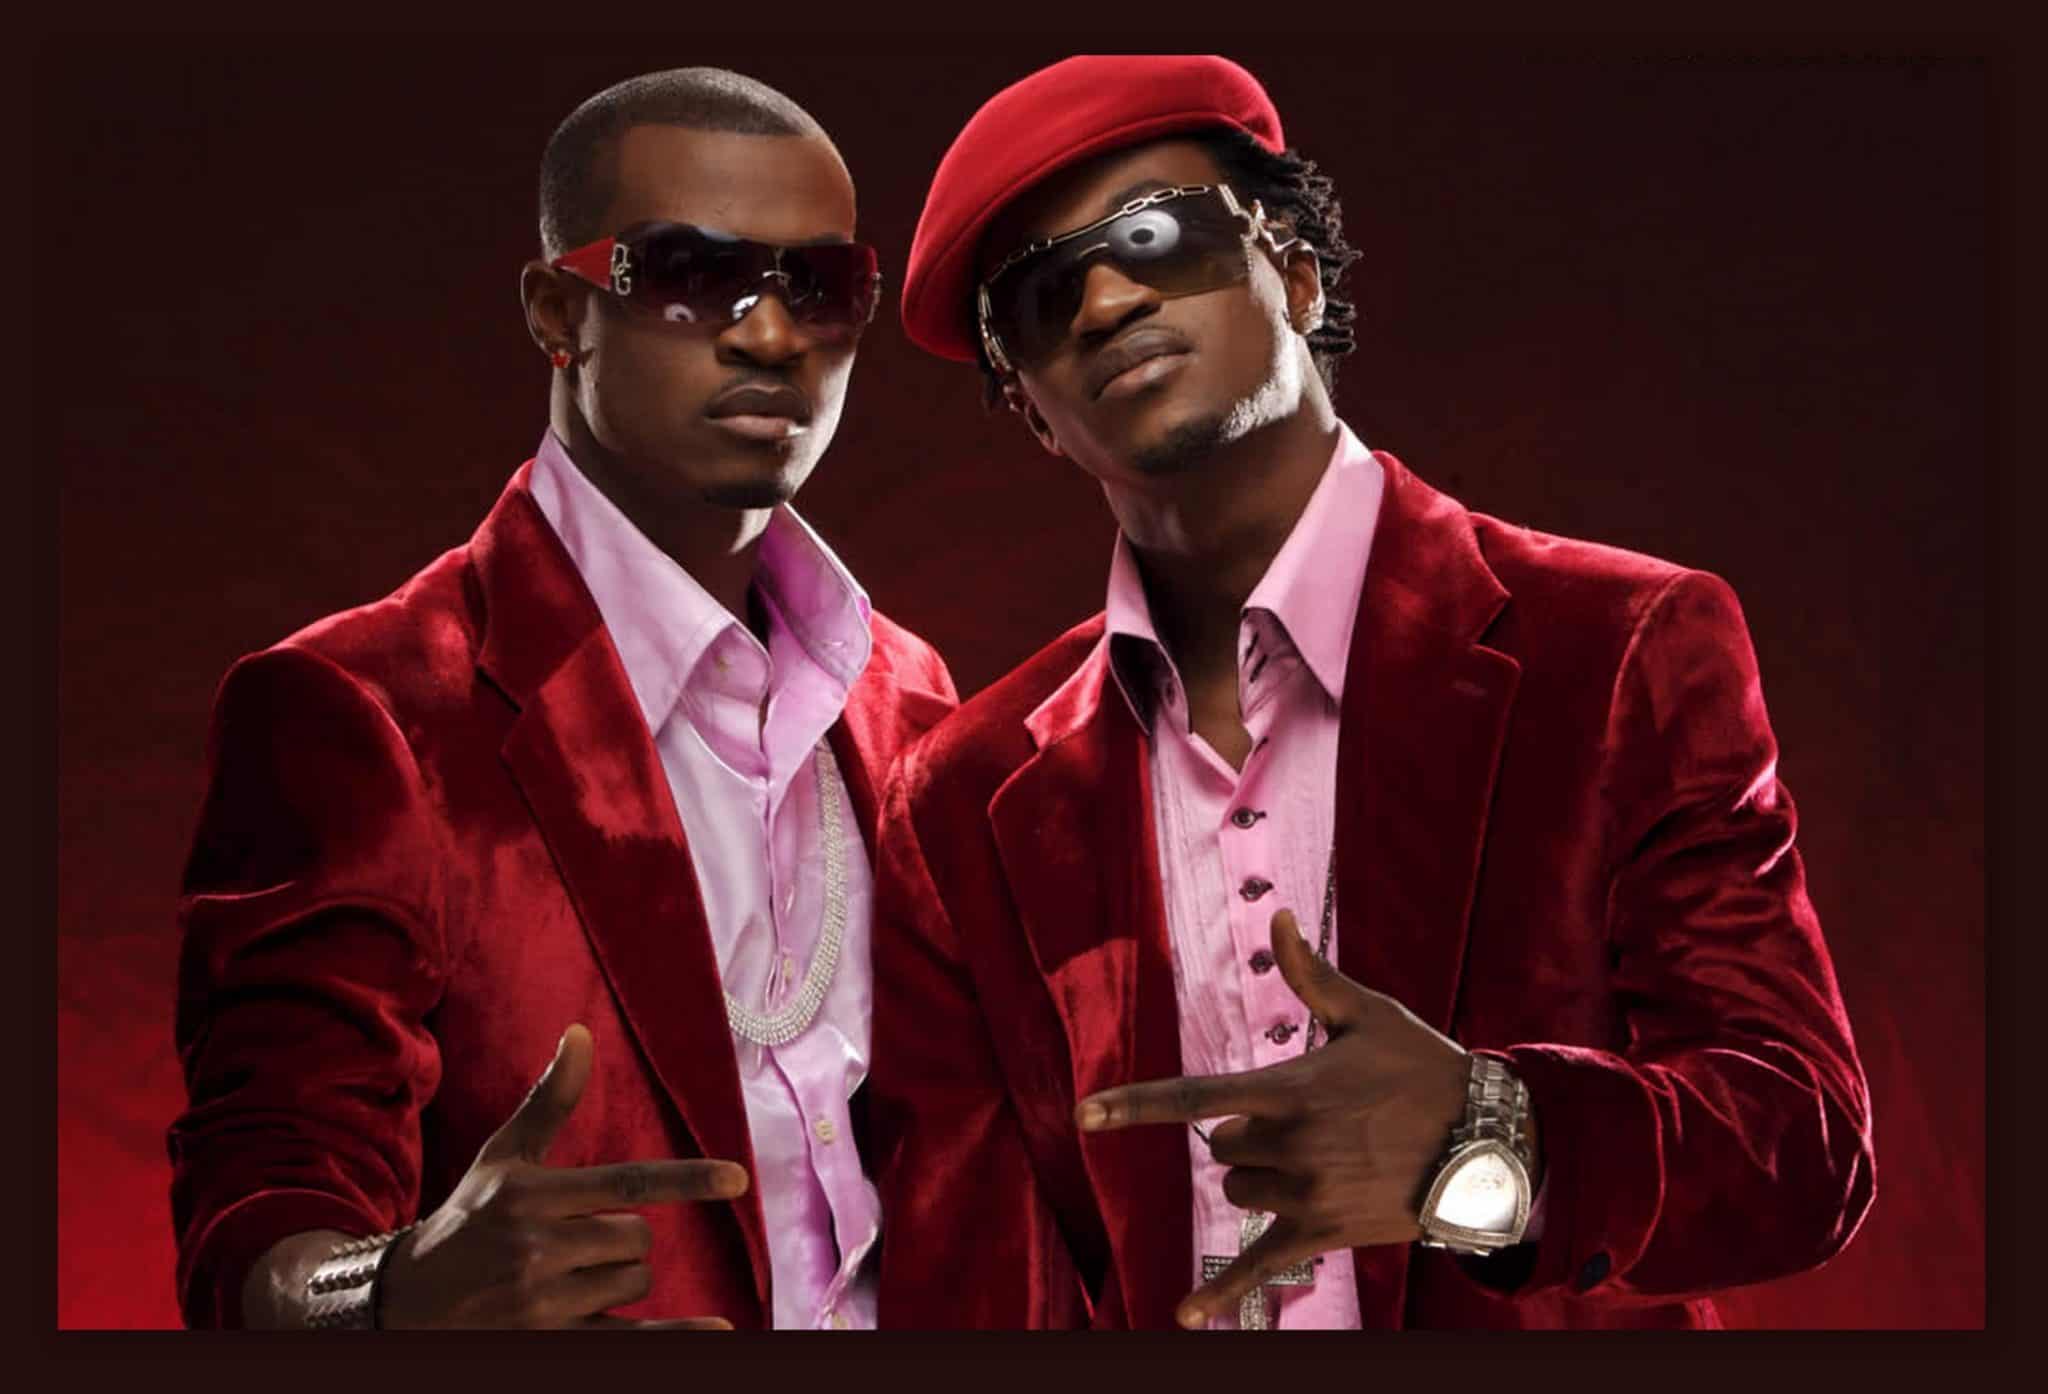 The Shuffle: Revisit the title track from P-Square’s platinum-selling album, ‘Game Over’